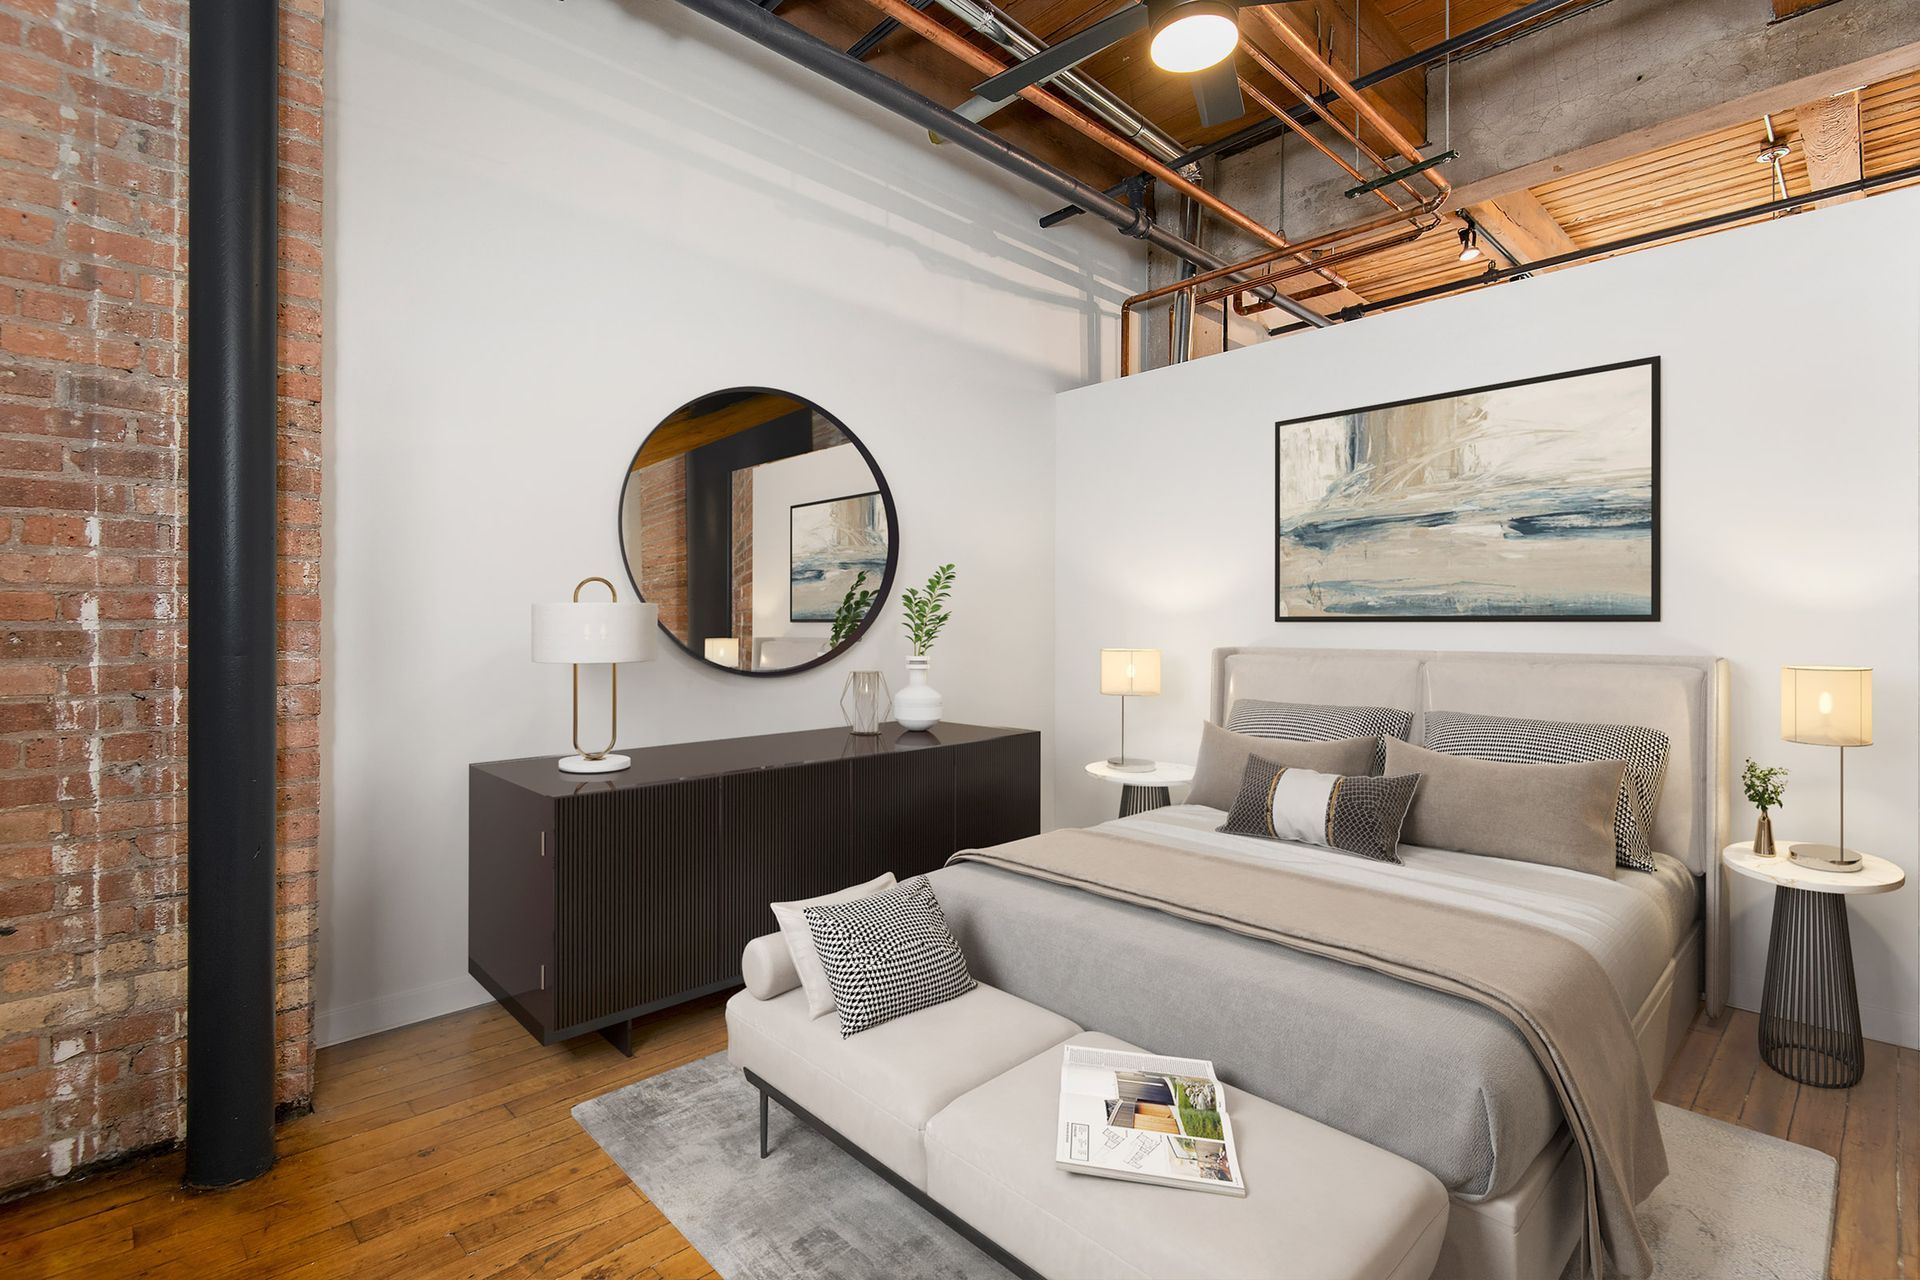 A bedroom with a large bed , a couch , a mirror and a dresser at The Lofts at Gin Alley.